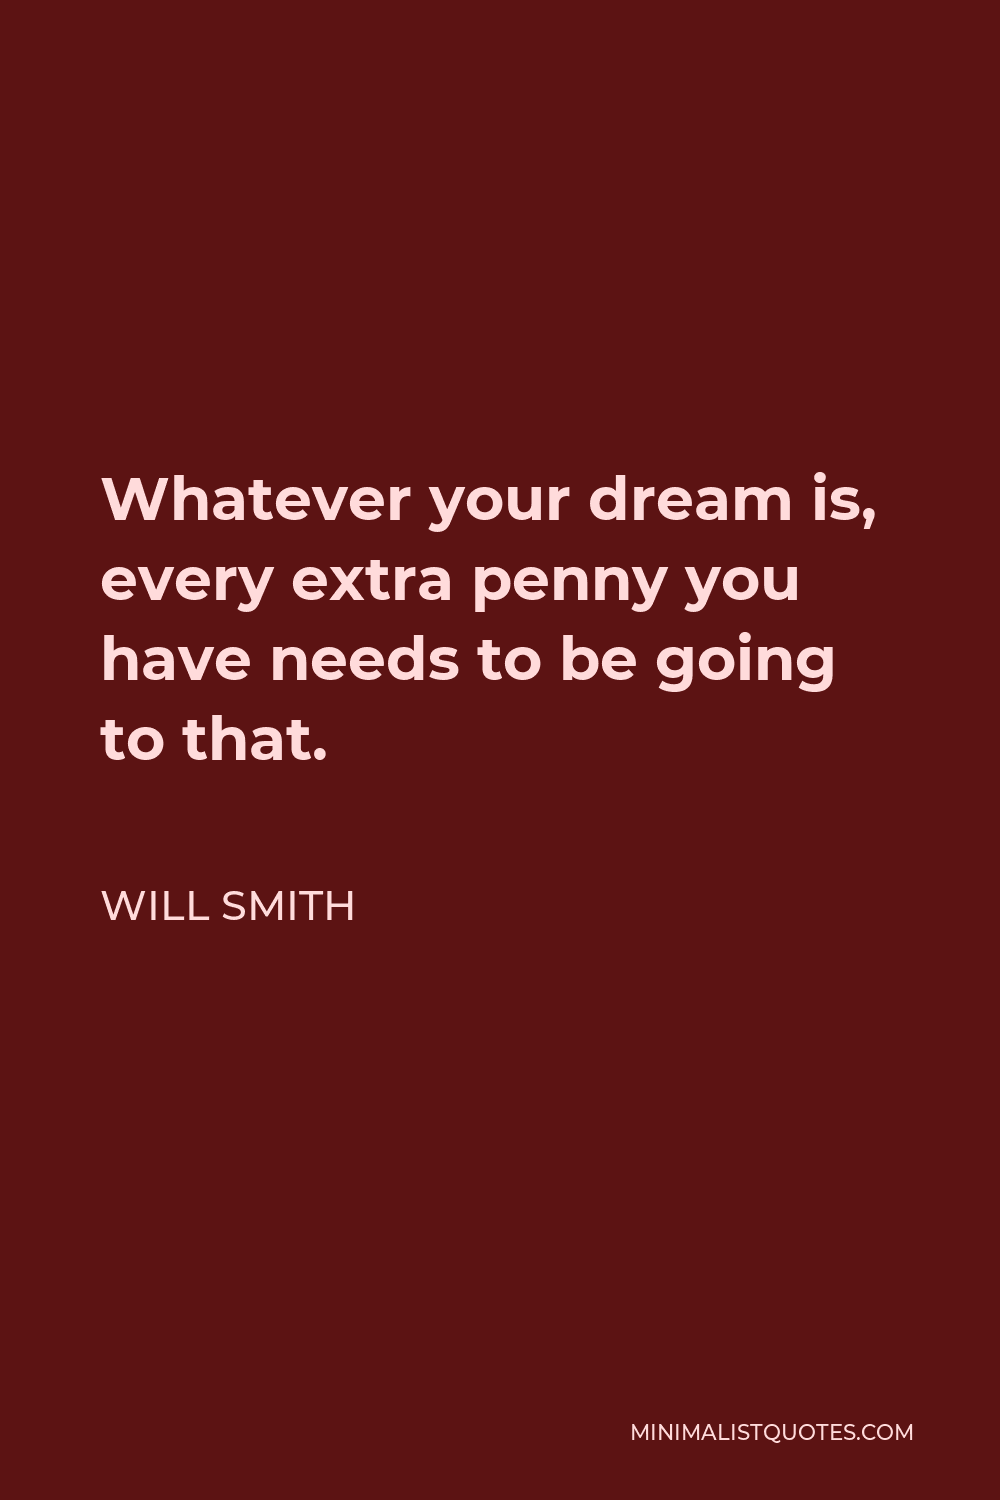 Will Smith Quote - Whatever your dream is, every extra penny you have needs to be going to that.